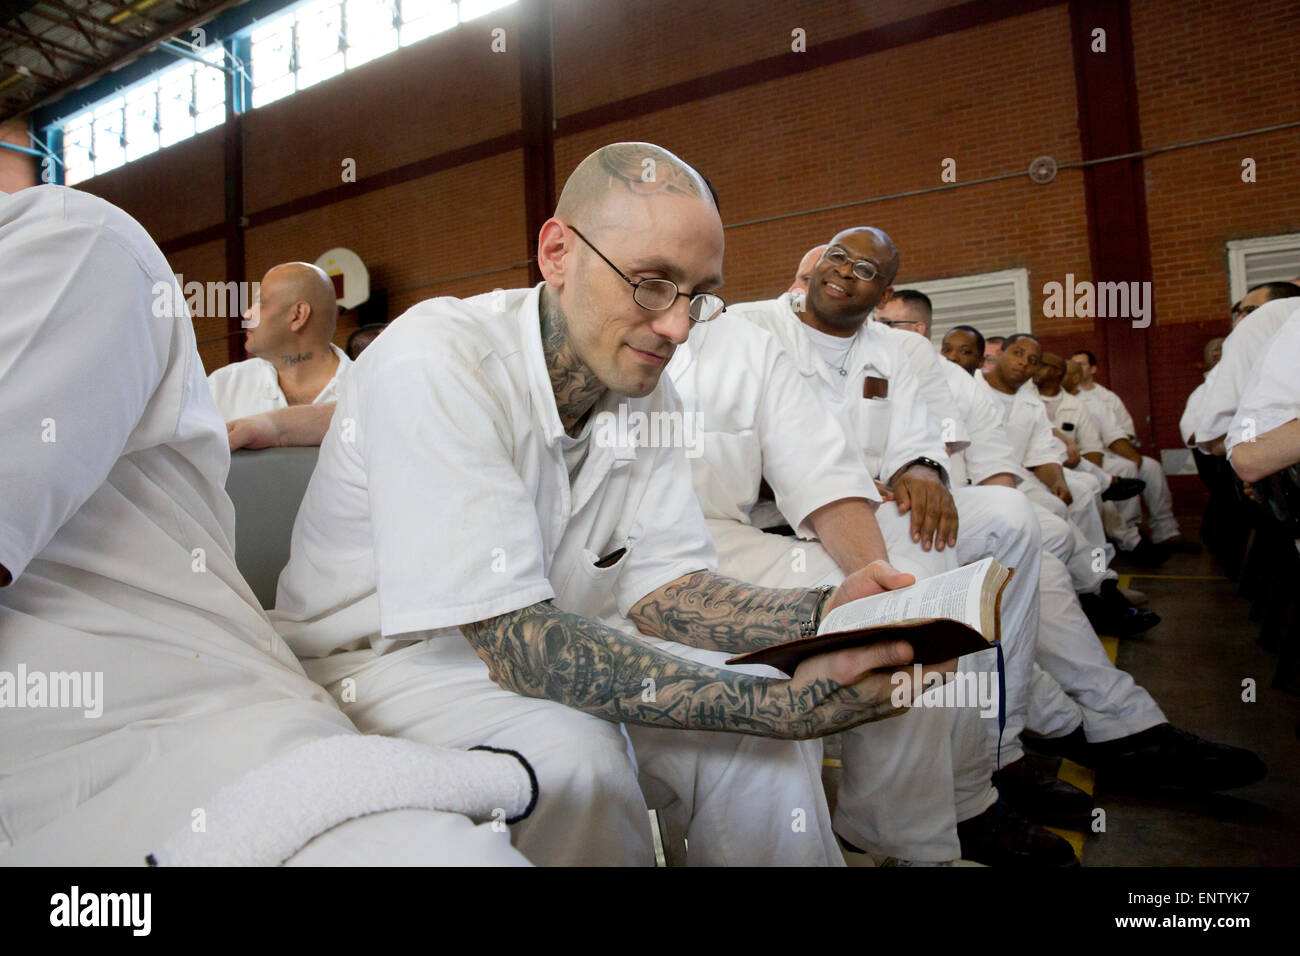 Male inmate students of a Christian ministry program inside the maximum security prison near Houston, Texas Stock Photo